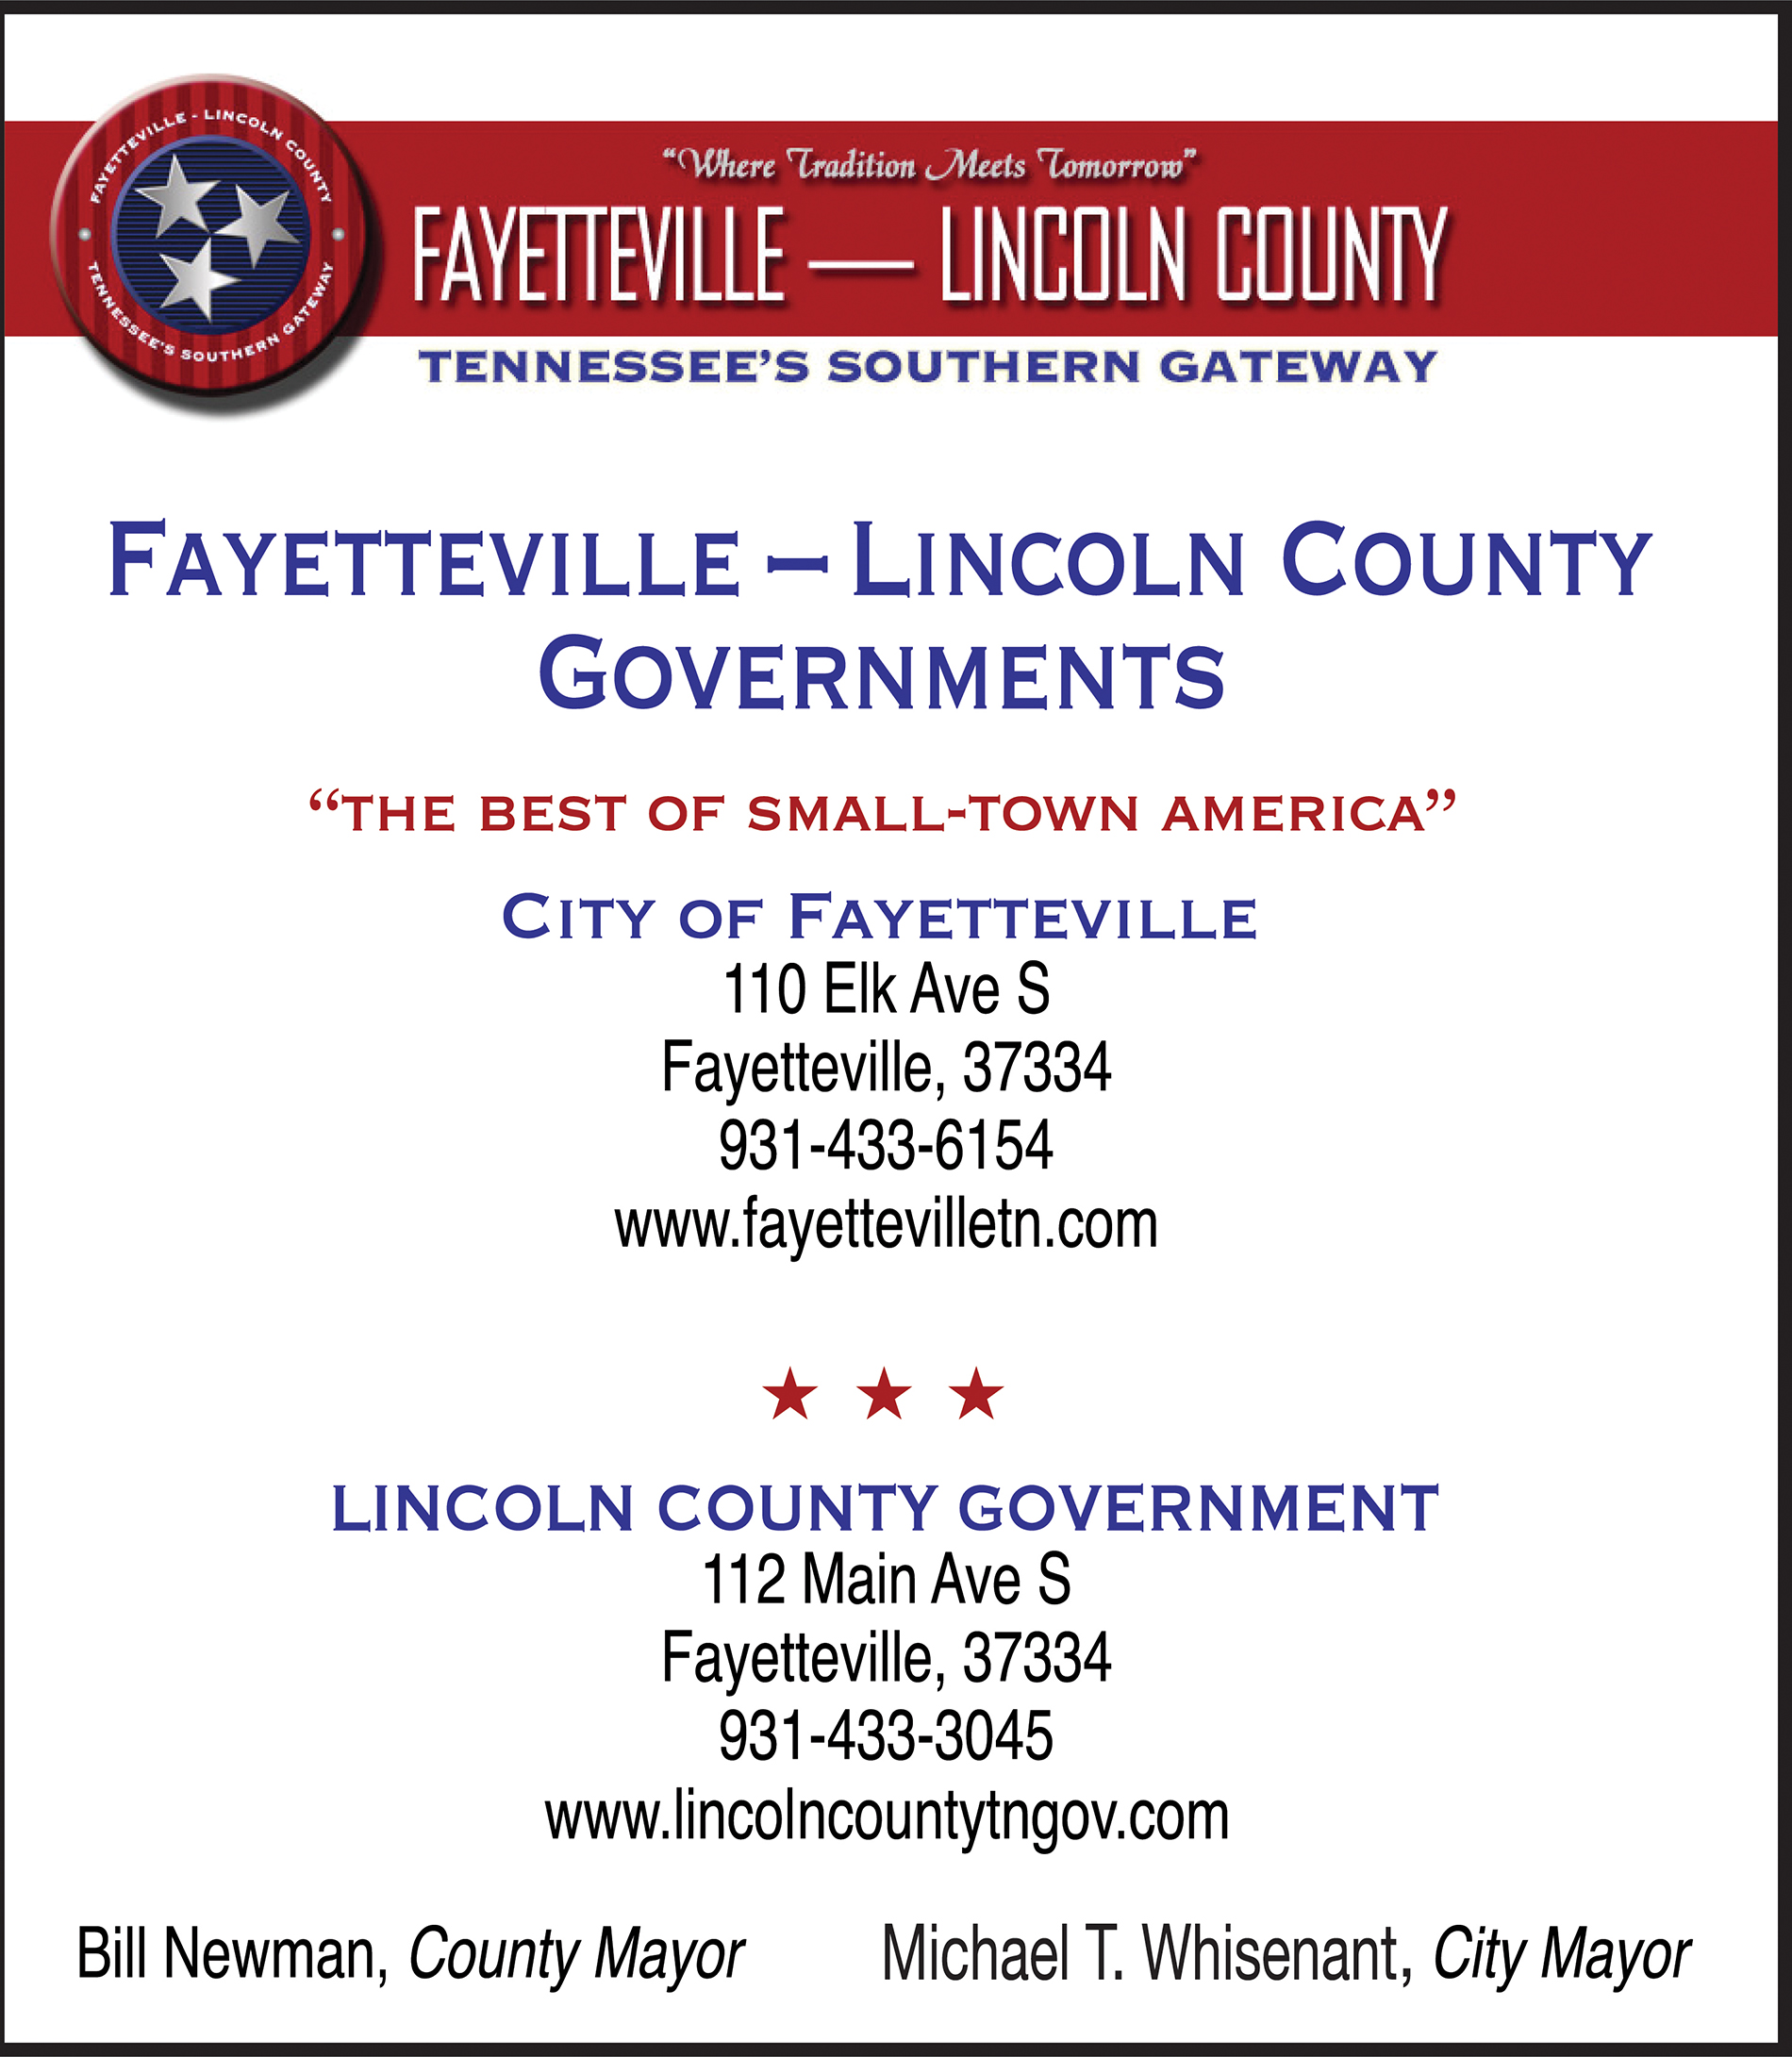 Fayetteville lincoln county government ad